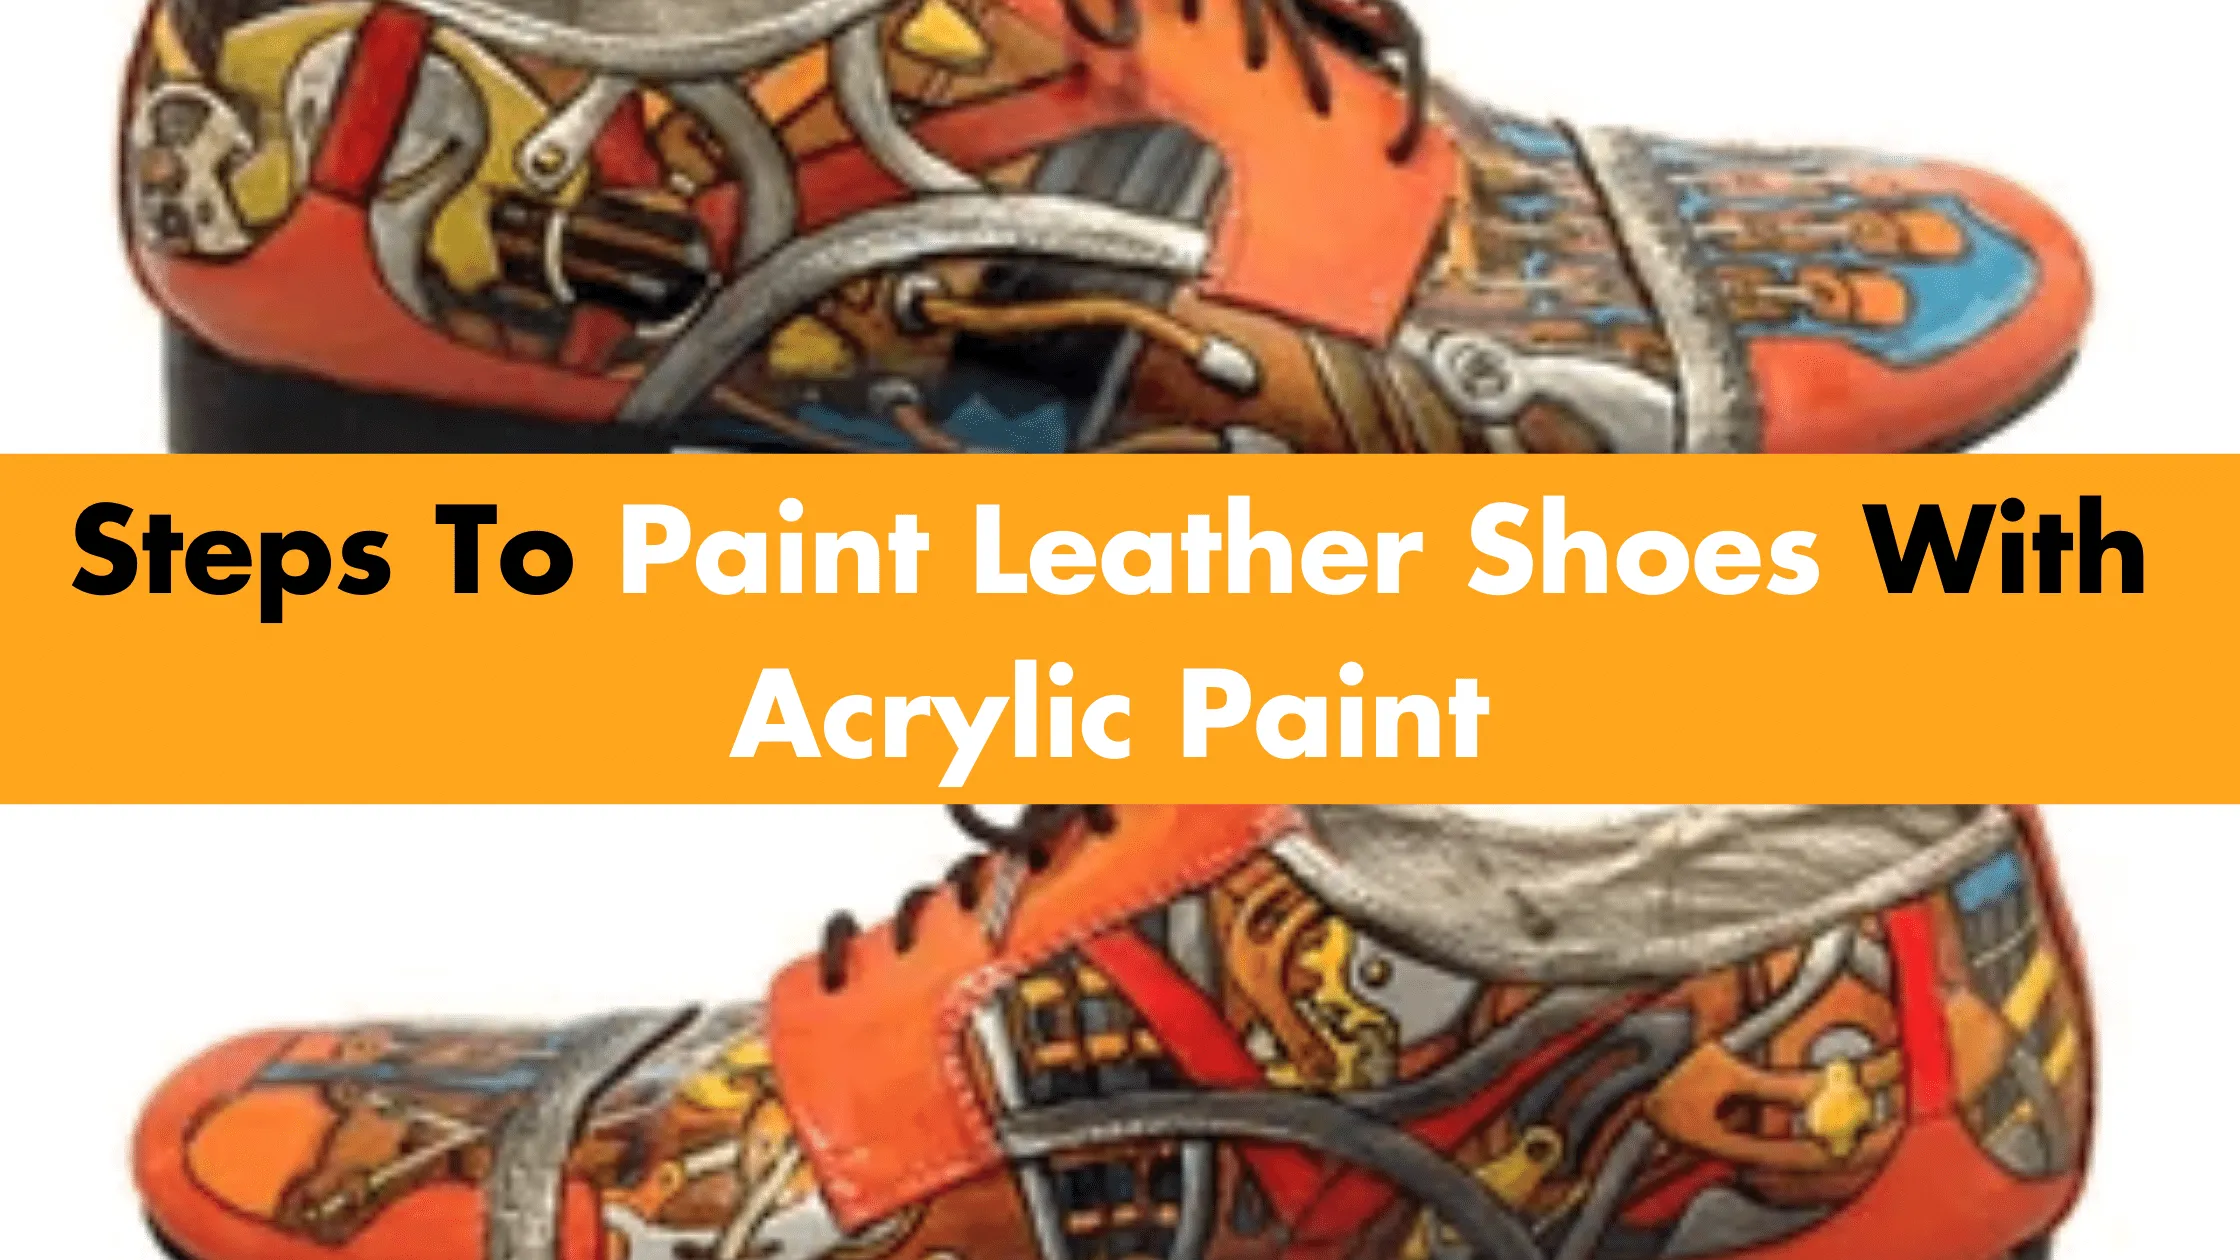 Steps To Paint Leather Shoes with Acrylic Paint